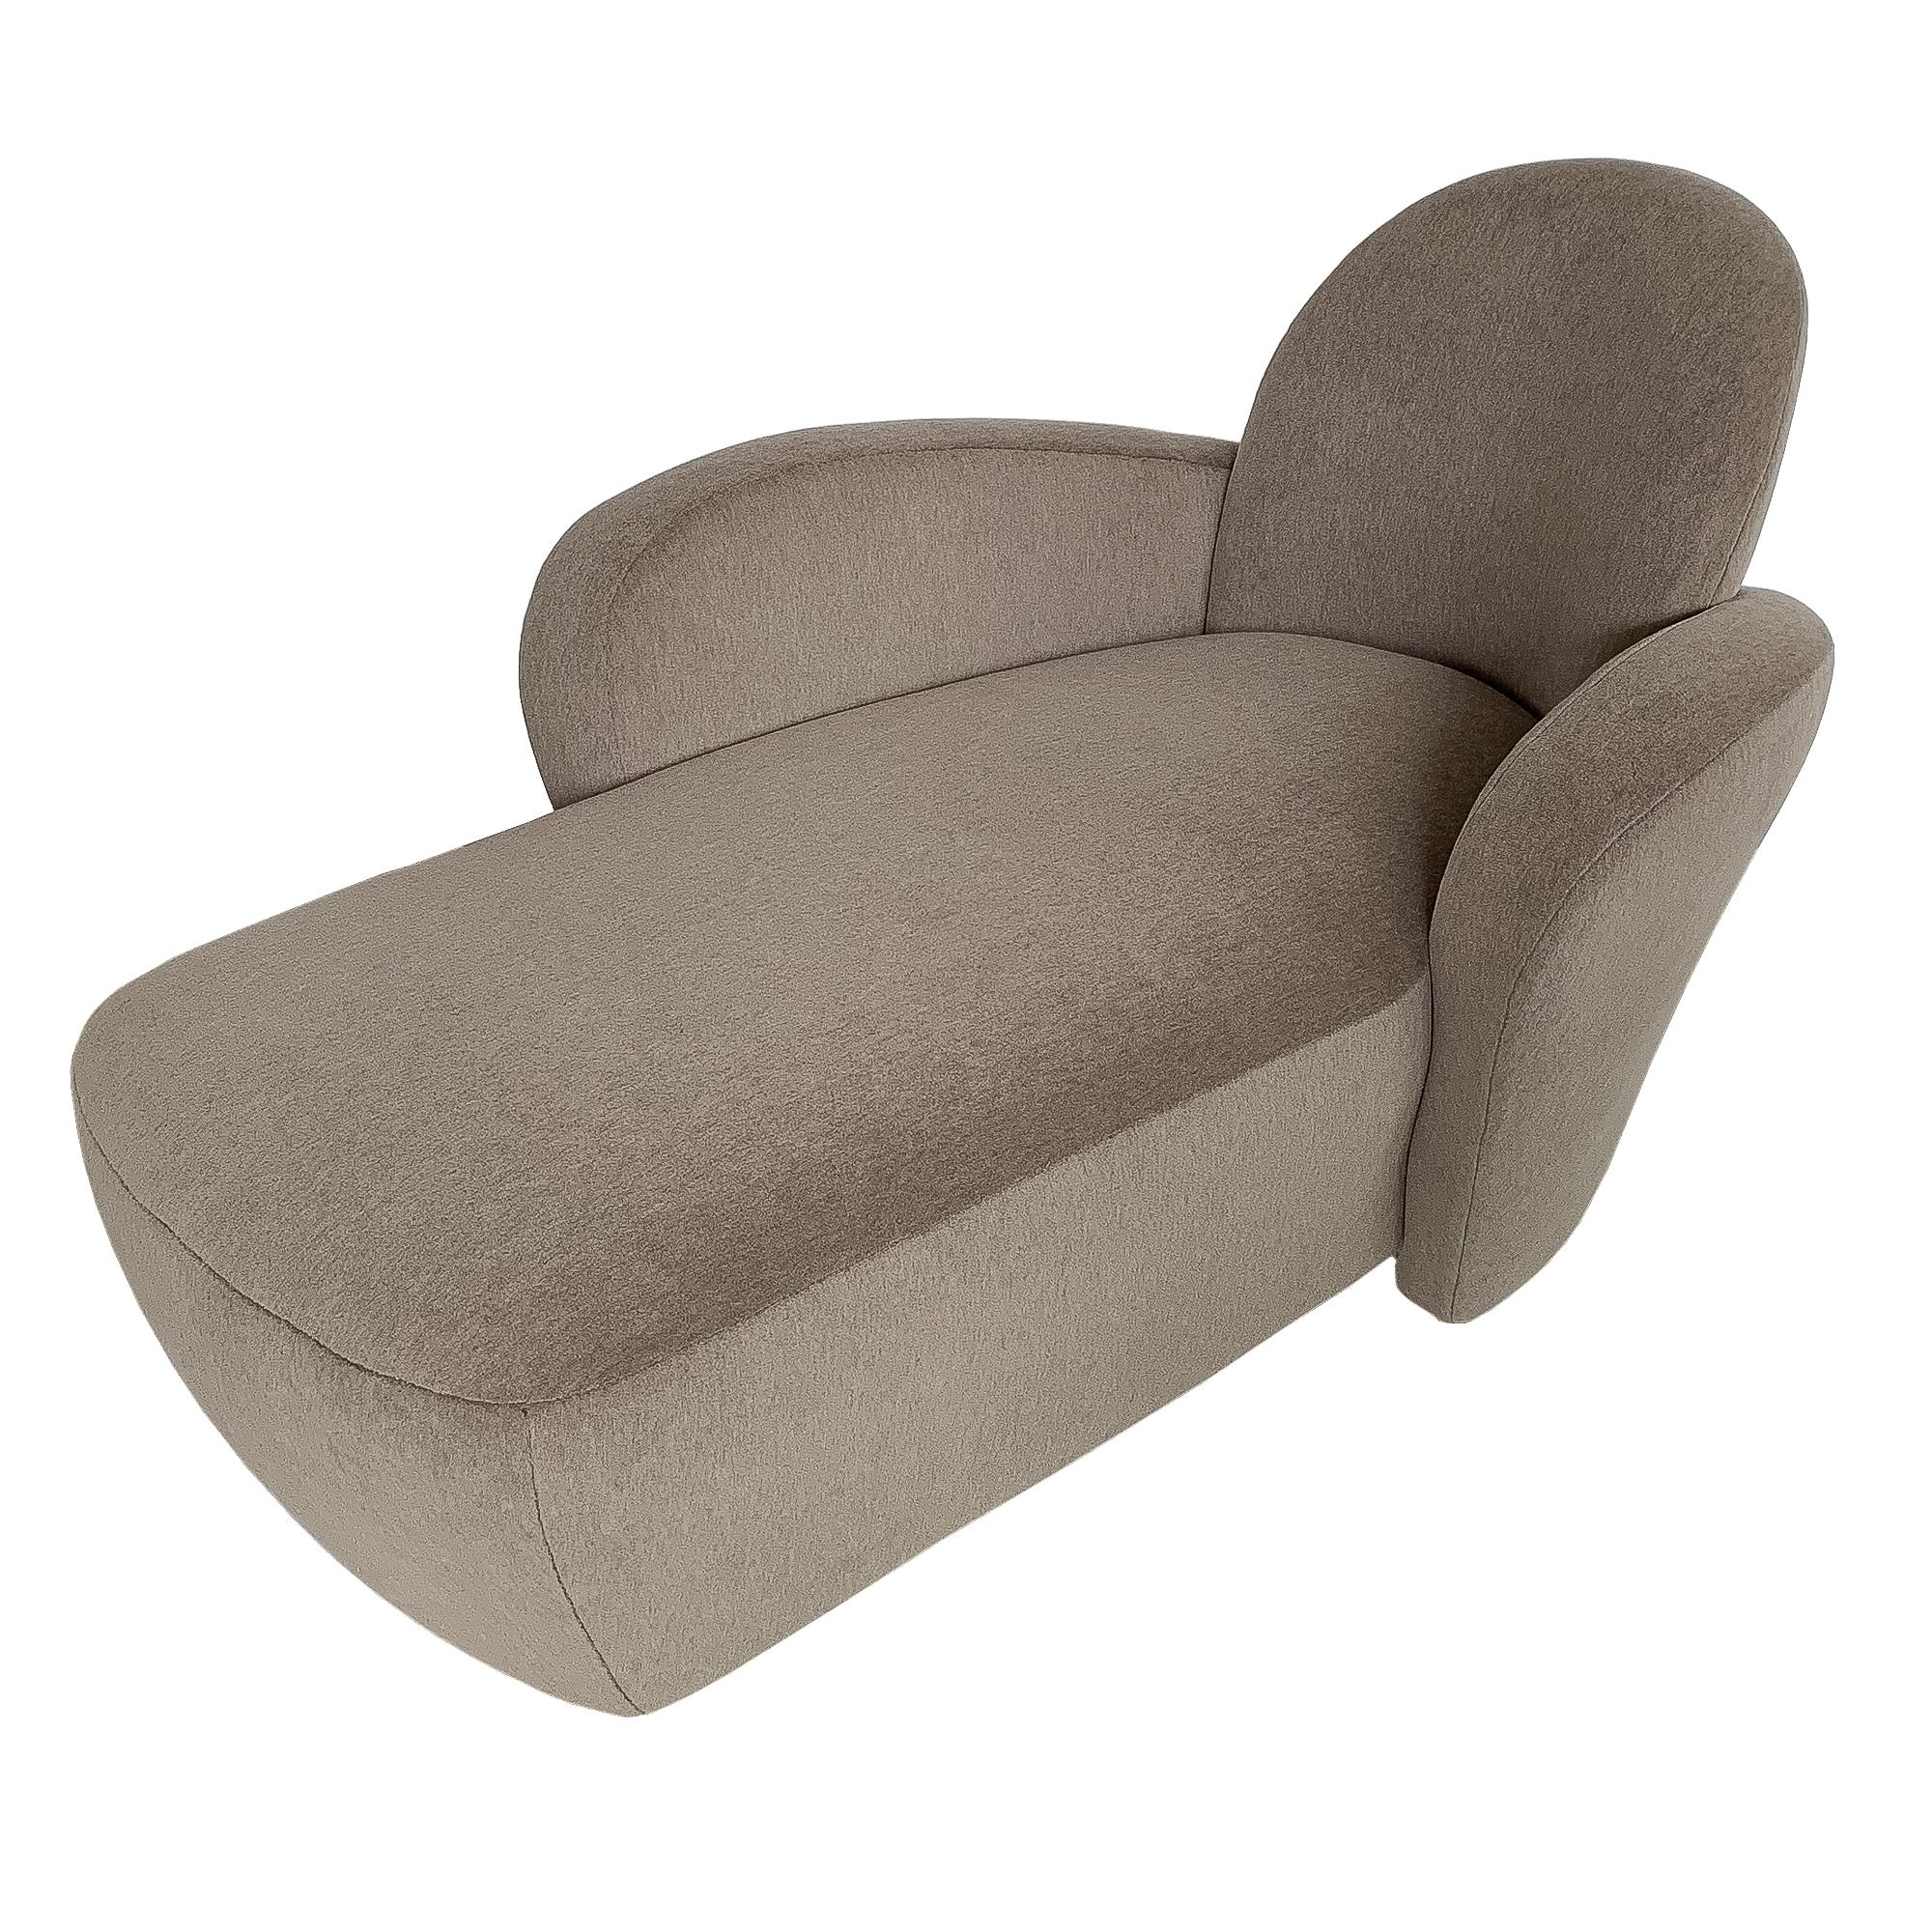 Fully Upholstered "Miami" Wrap around Arm Chaise Lounge for Weiman Preview